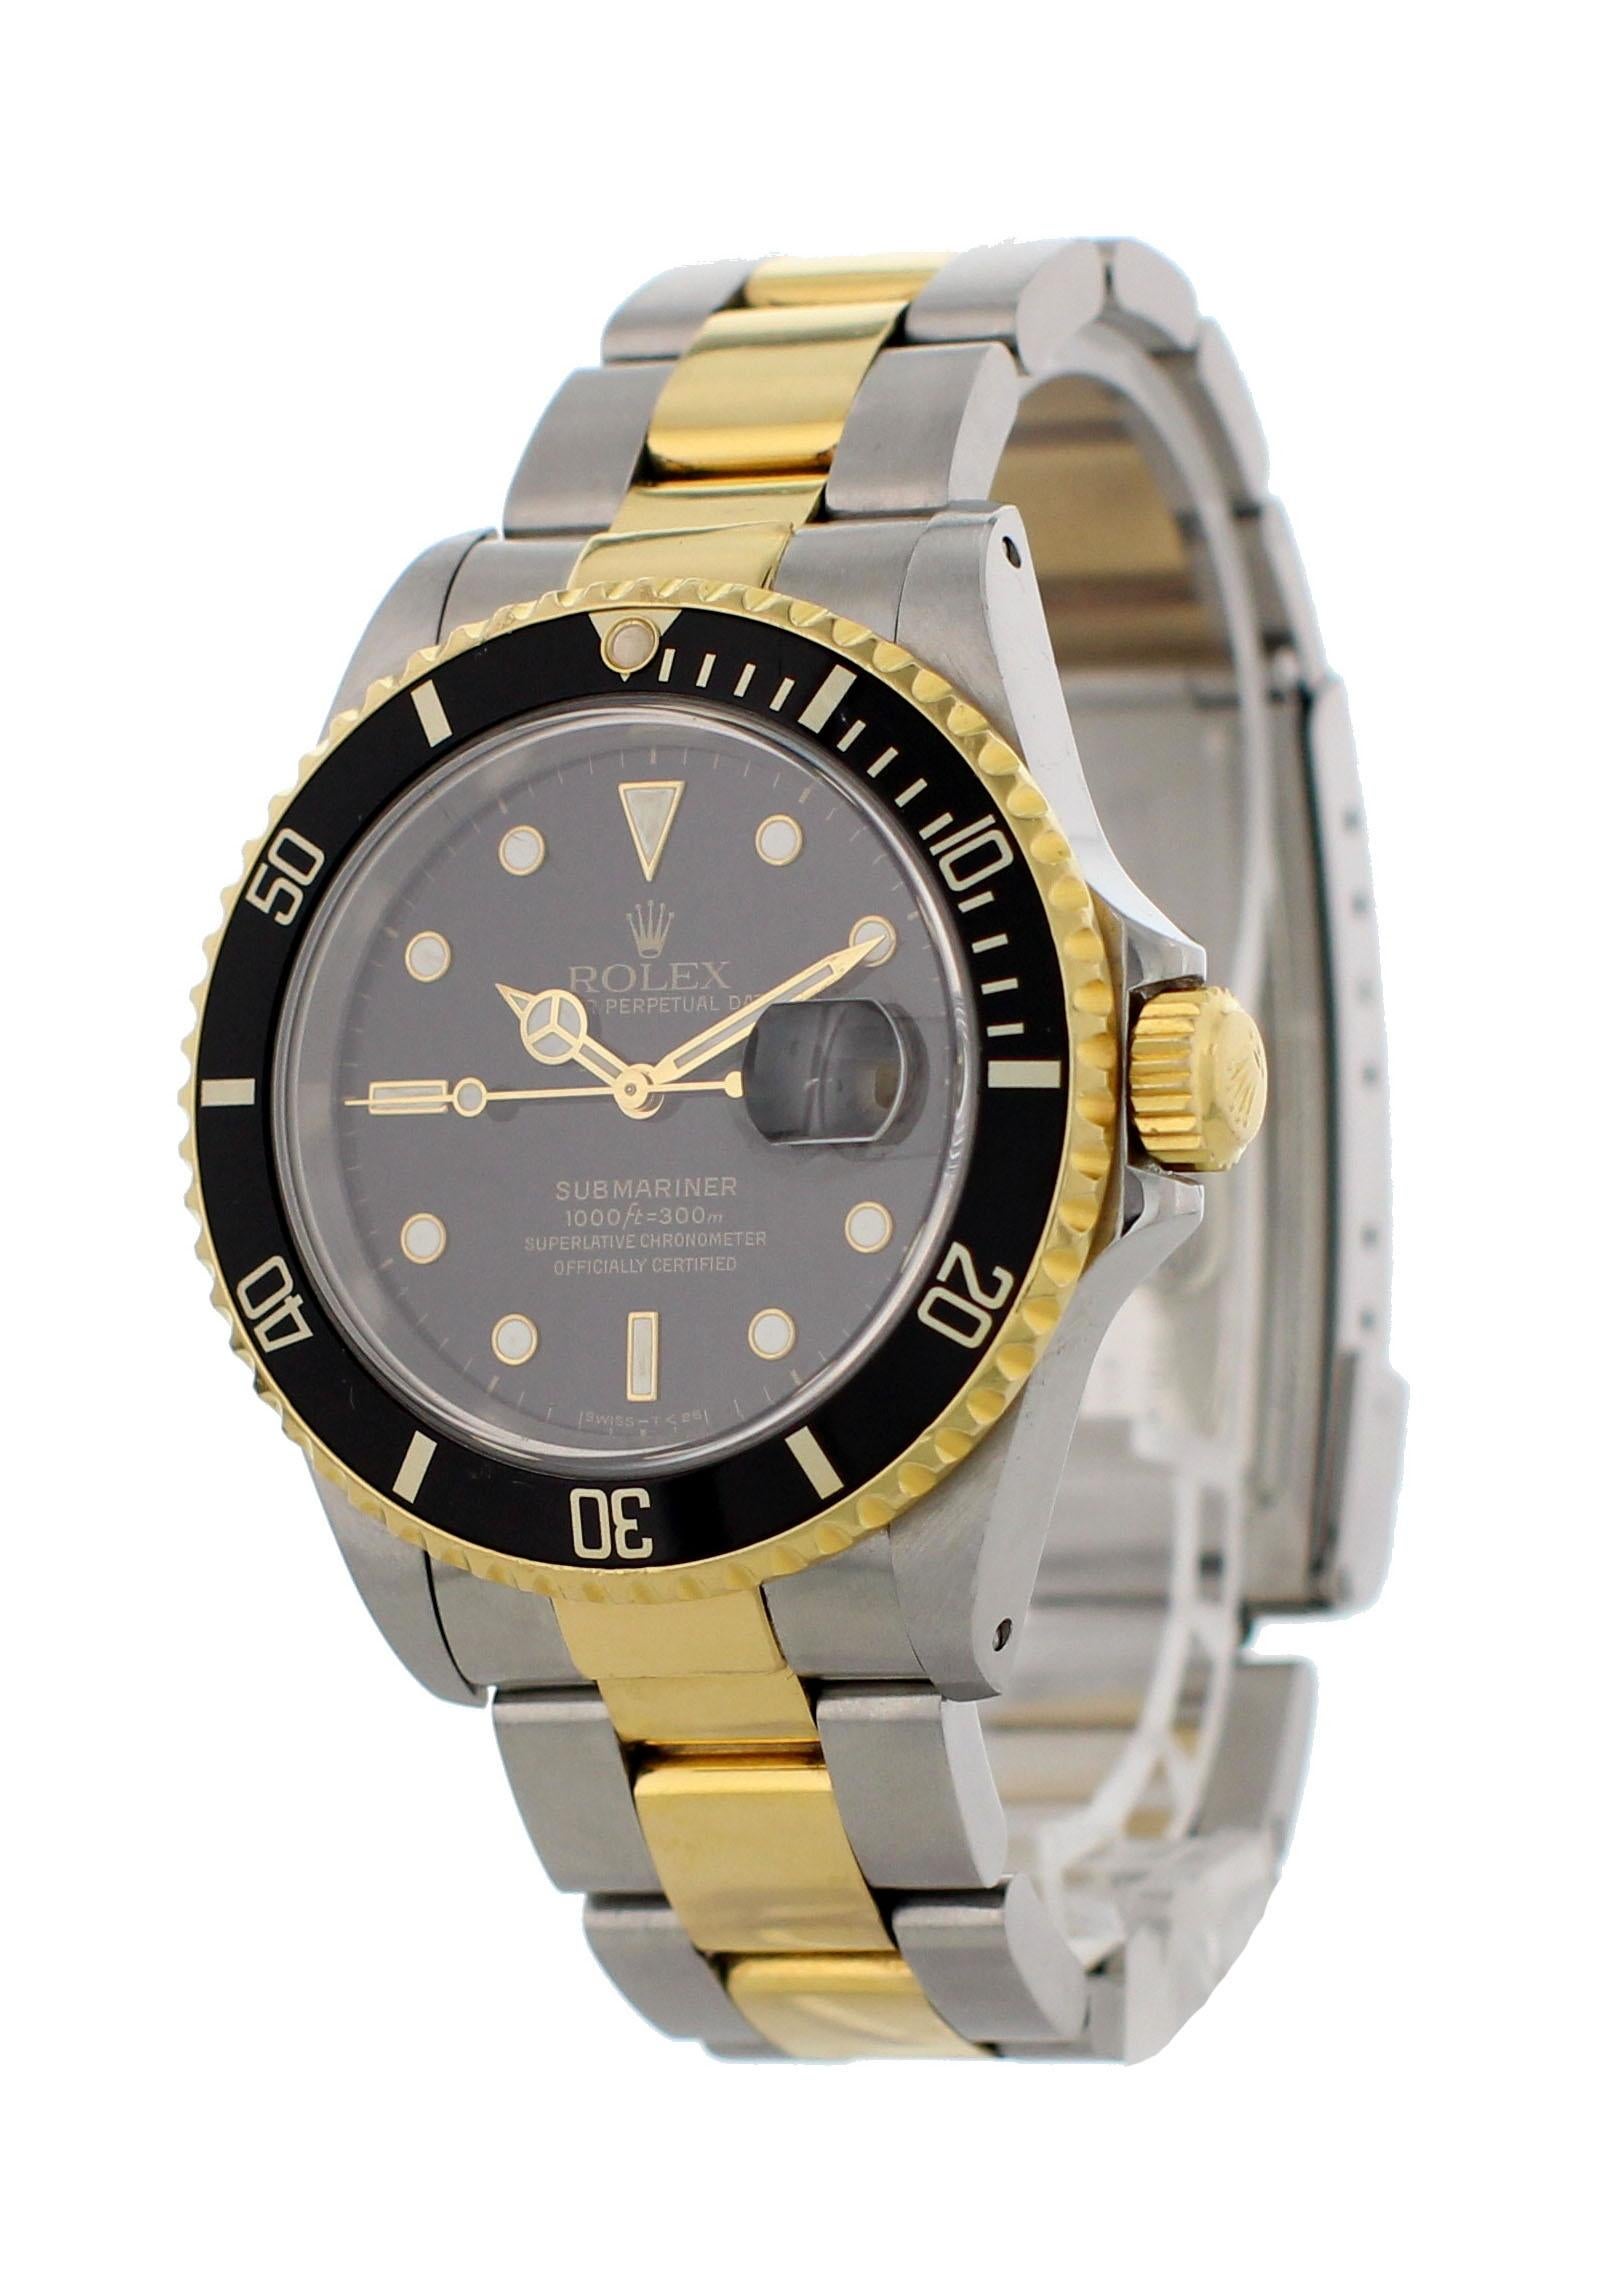 Rolex oyster perpetual Submariner Date 16613 Mens Watch. 40mm Stainless steel case.18k yellow gold bezel with black bezel insert. Black dial with gold luminous hands and markers. 18k yellow gold and stainless steel Oyster band. Will fit up to a